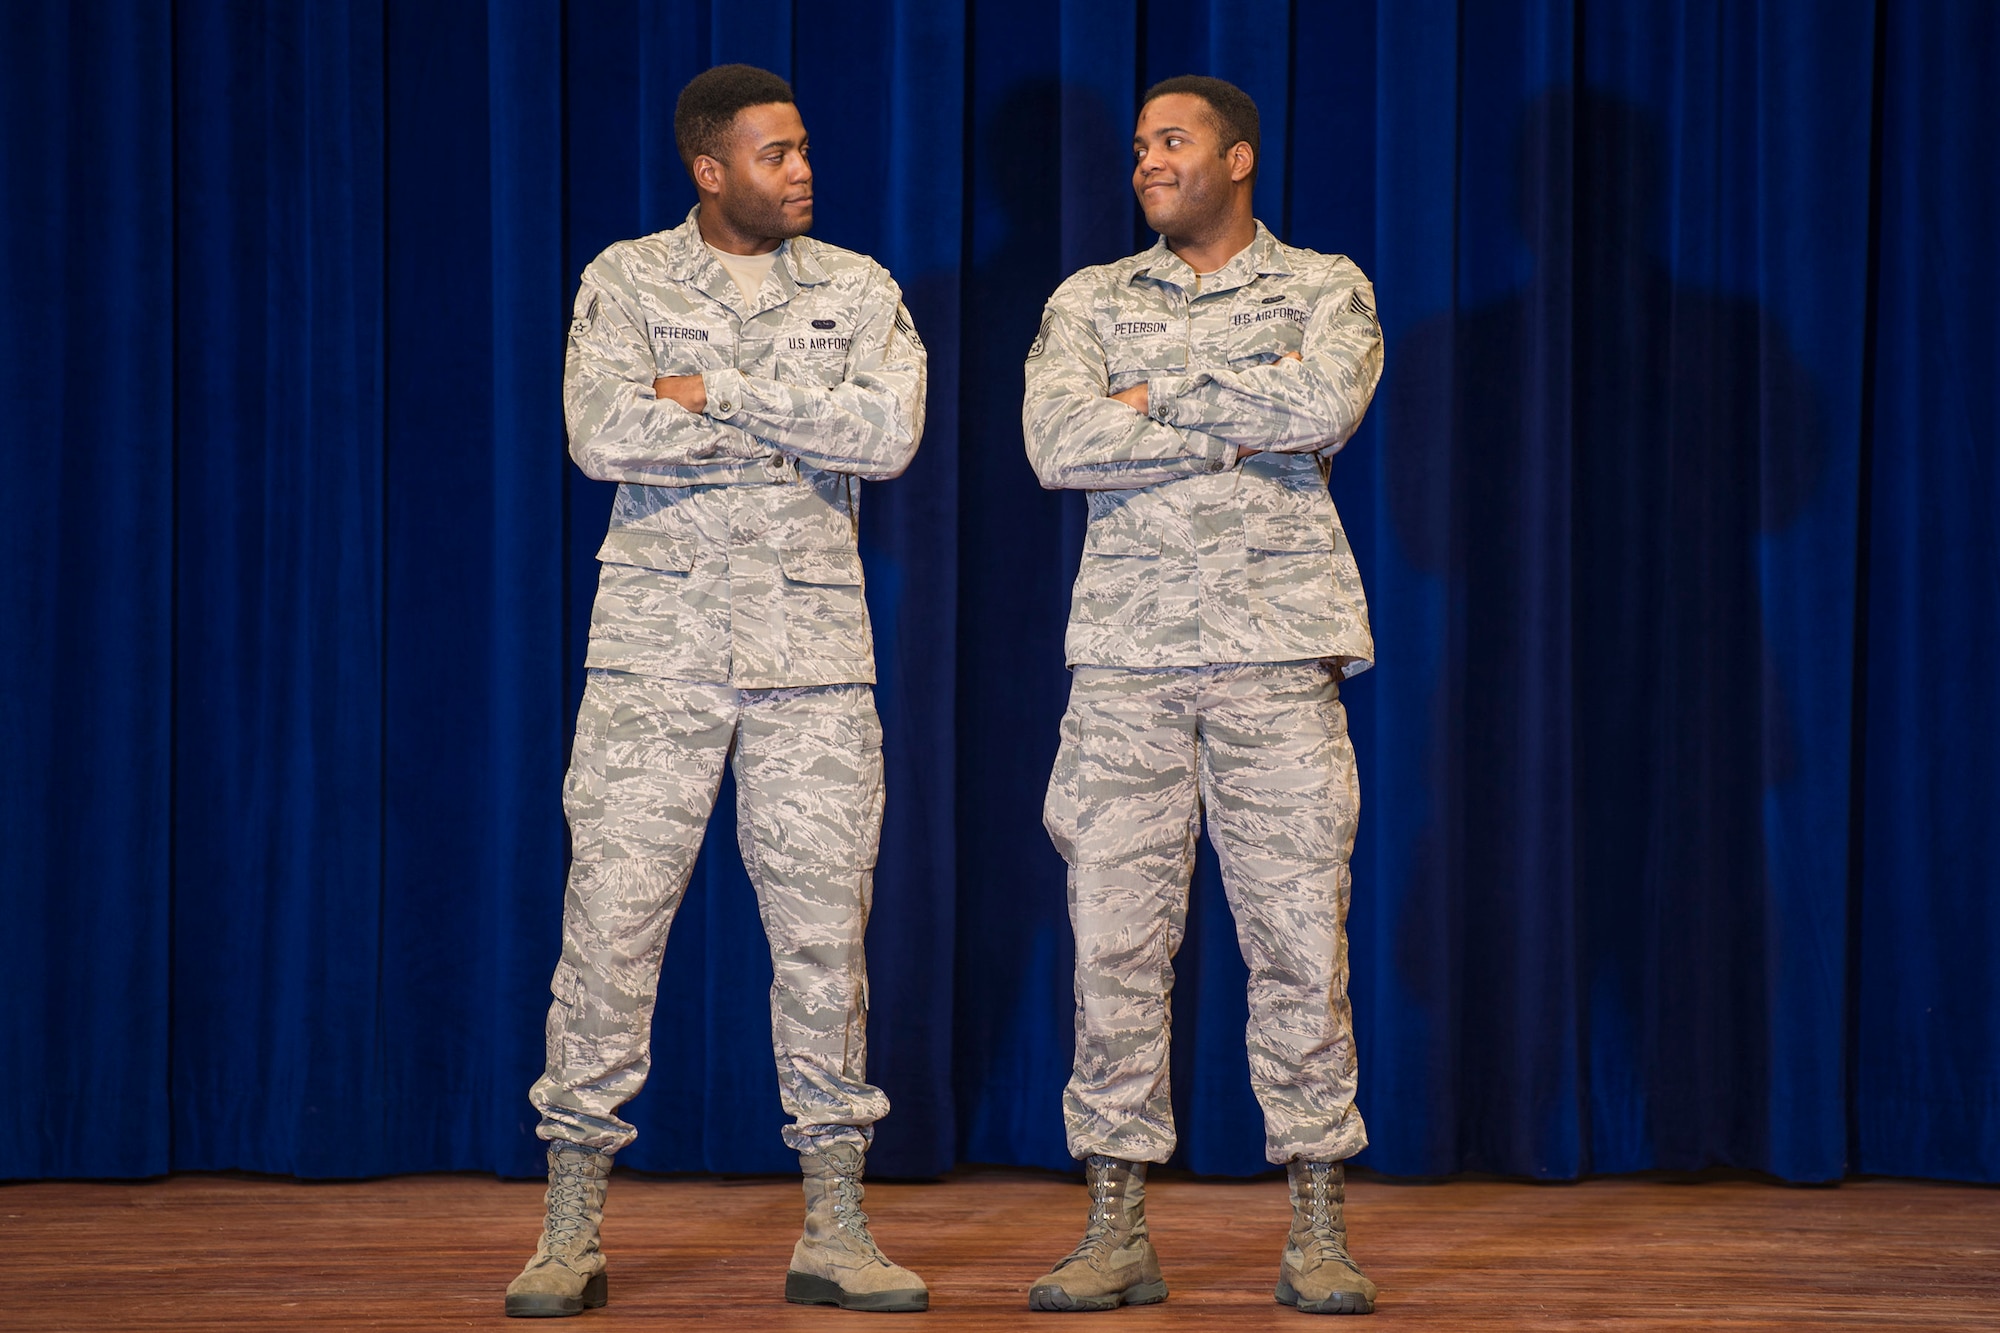 Senior Airman Jarrod Peterson (left) glances at his twin brother, Staff Sgt. Jordan Peterson, as the two pose for a photo during a photo shoot at Patrick AFB, Fla., Nov. 30, 2017.   The Peterson brothers are not only assigned to the same wing and squadron; they are also in the same flight at the Air Force Technical Applications Center. (U.S. Air Force photo by Matthew S. Jurgens)